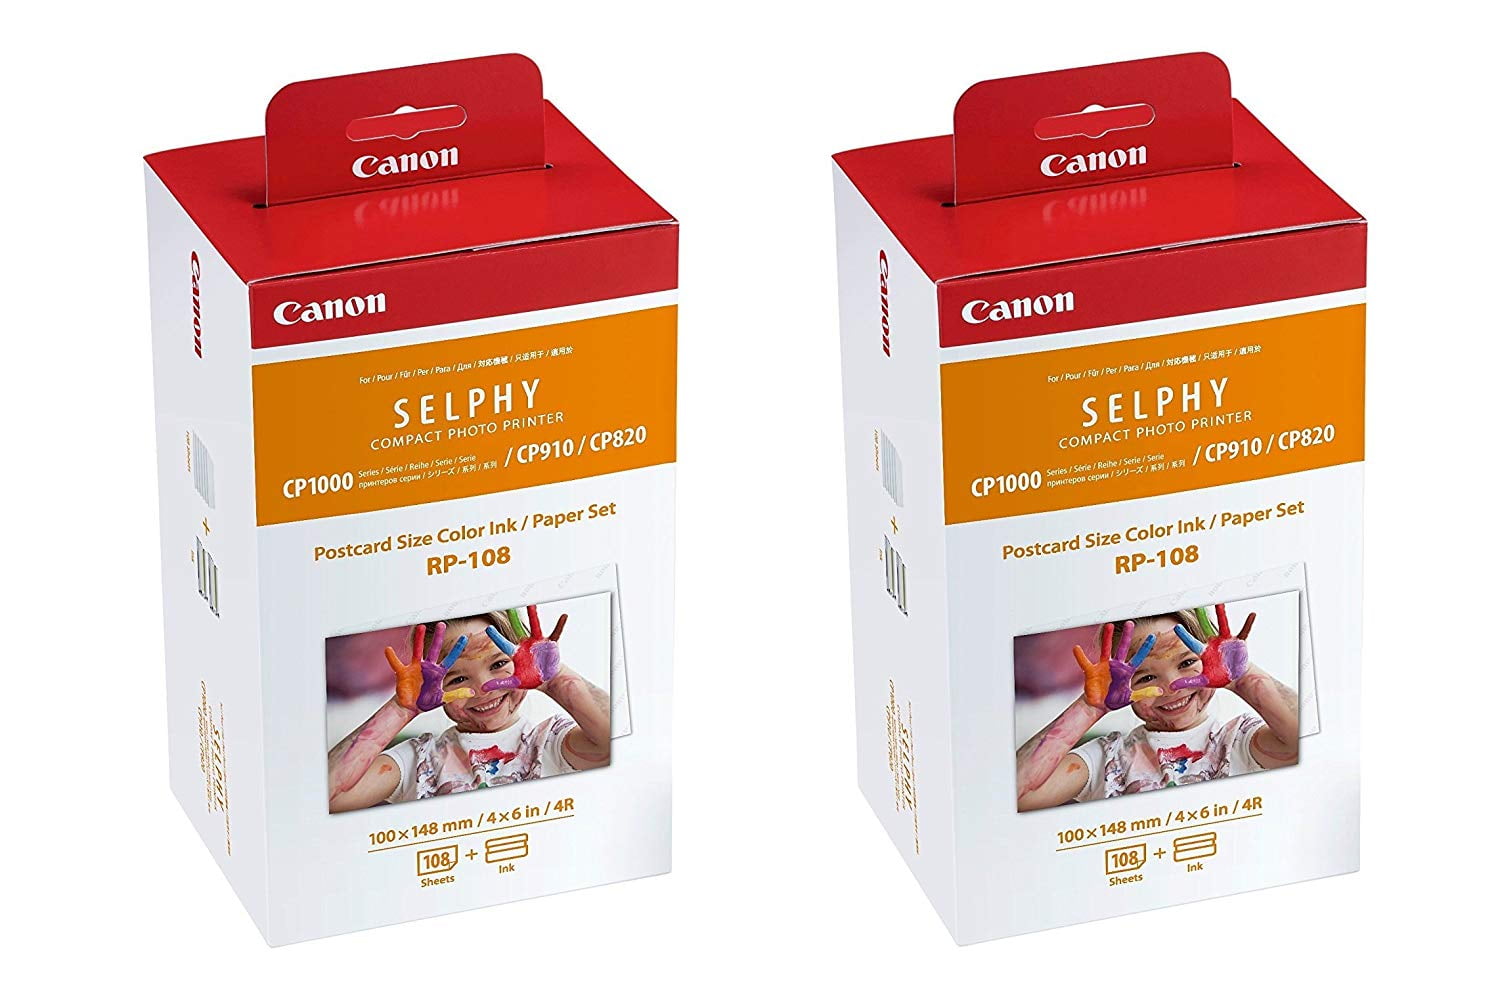 2 Ink Toners / 108 Paper Sheets Compatible with Canon SELPHY CP820 CP1200 CP1300 Compact Printers Canon RP-108 / RP108 Color Ink Paper Set CP910 CP1000 